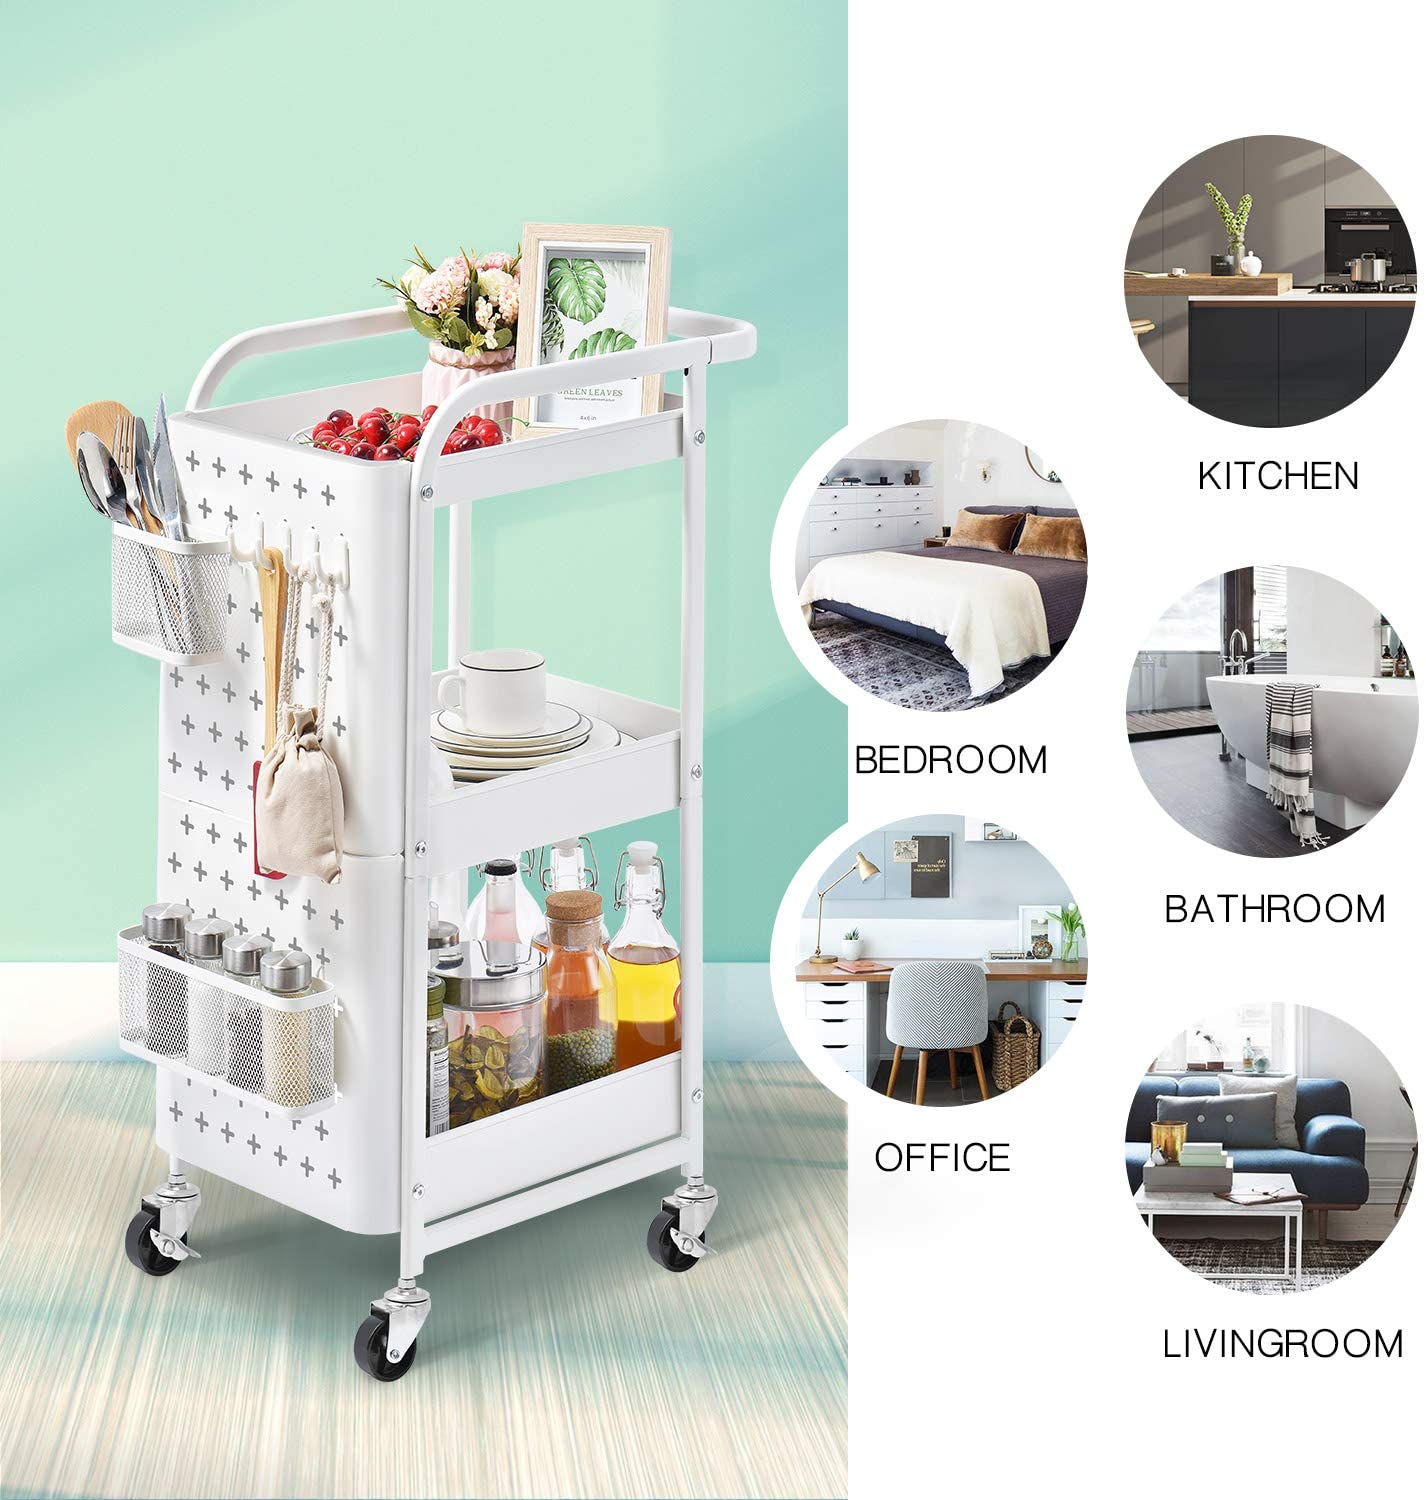 3 Tier Storage Rolling Cart, Heavy Duty Rolling Utility Cart Metal Push Cart with Pegboard and Extra Baskets Hooks, Trolley Organizer Cart with Utility Handle for Kitchen Office Home, White - image 2 of 7